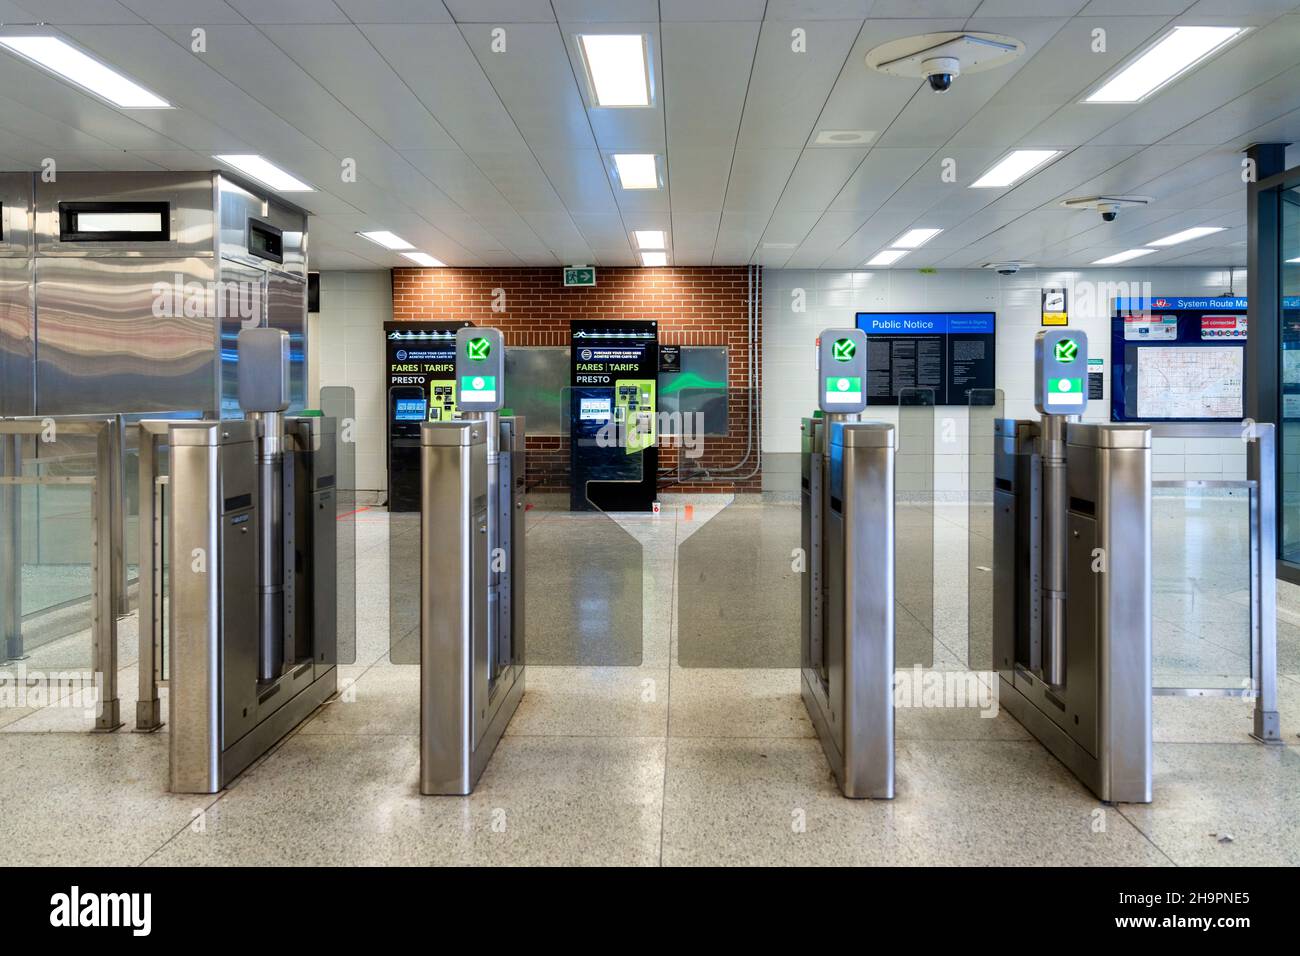 Automatic entrance of the Presto card system at Victoria Park subway stationDec. 8, 2021 Stock Photo